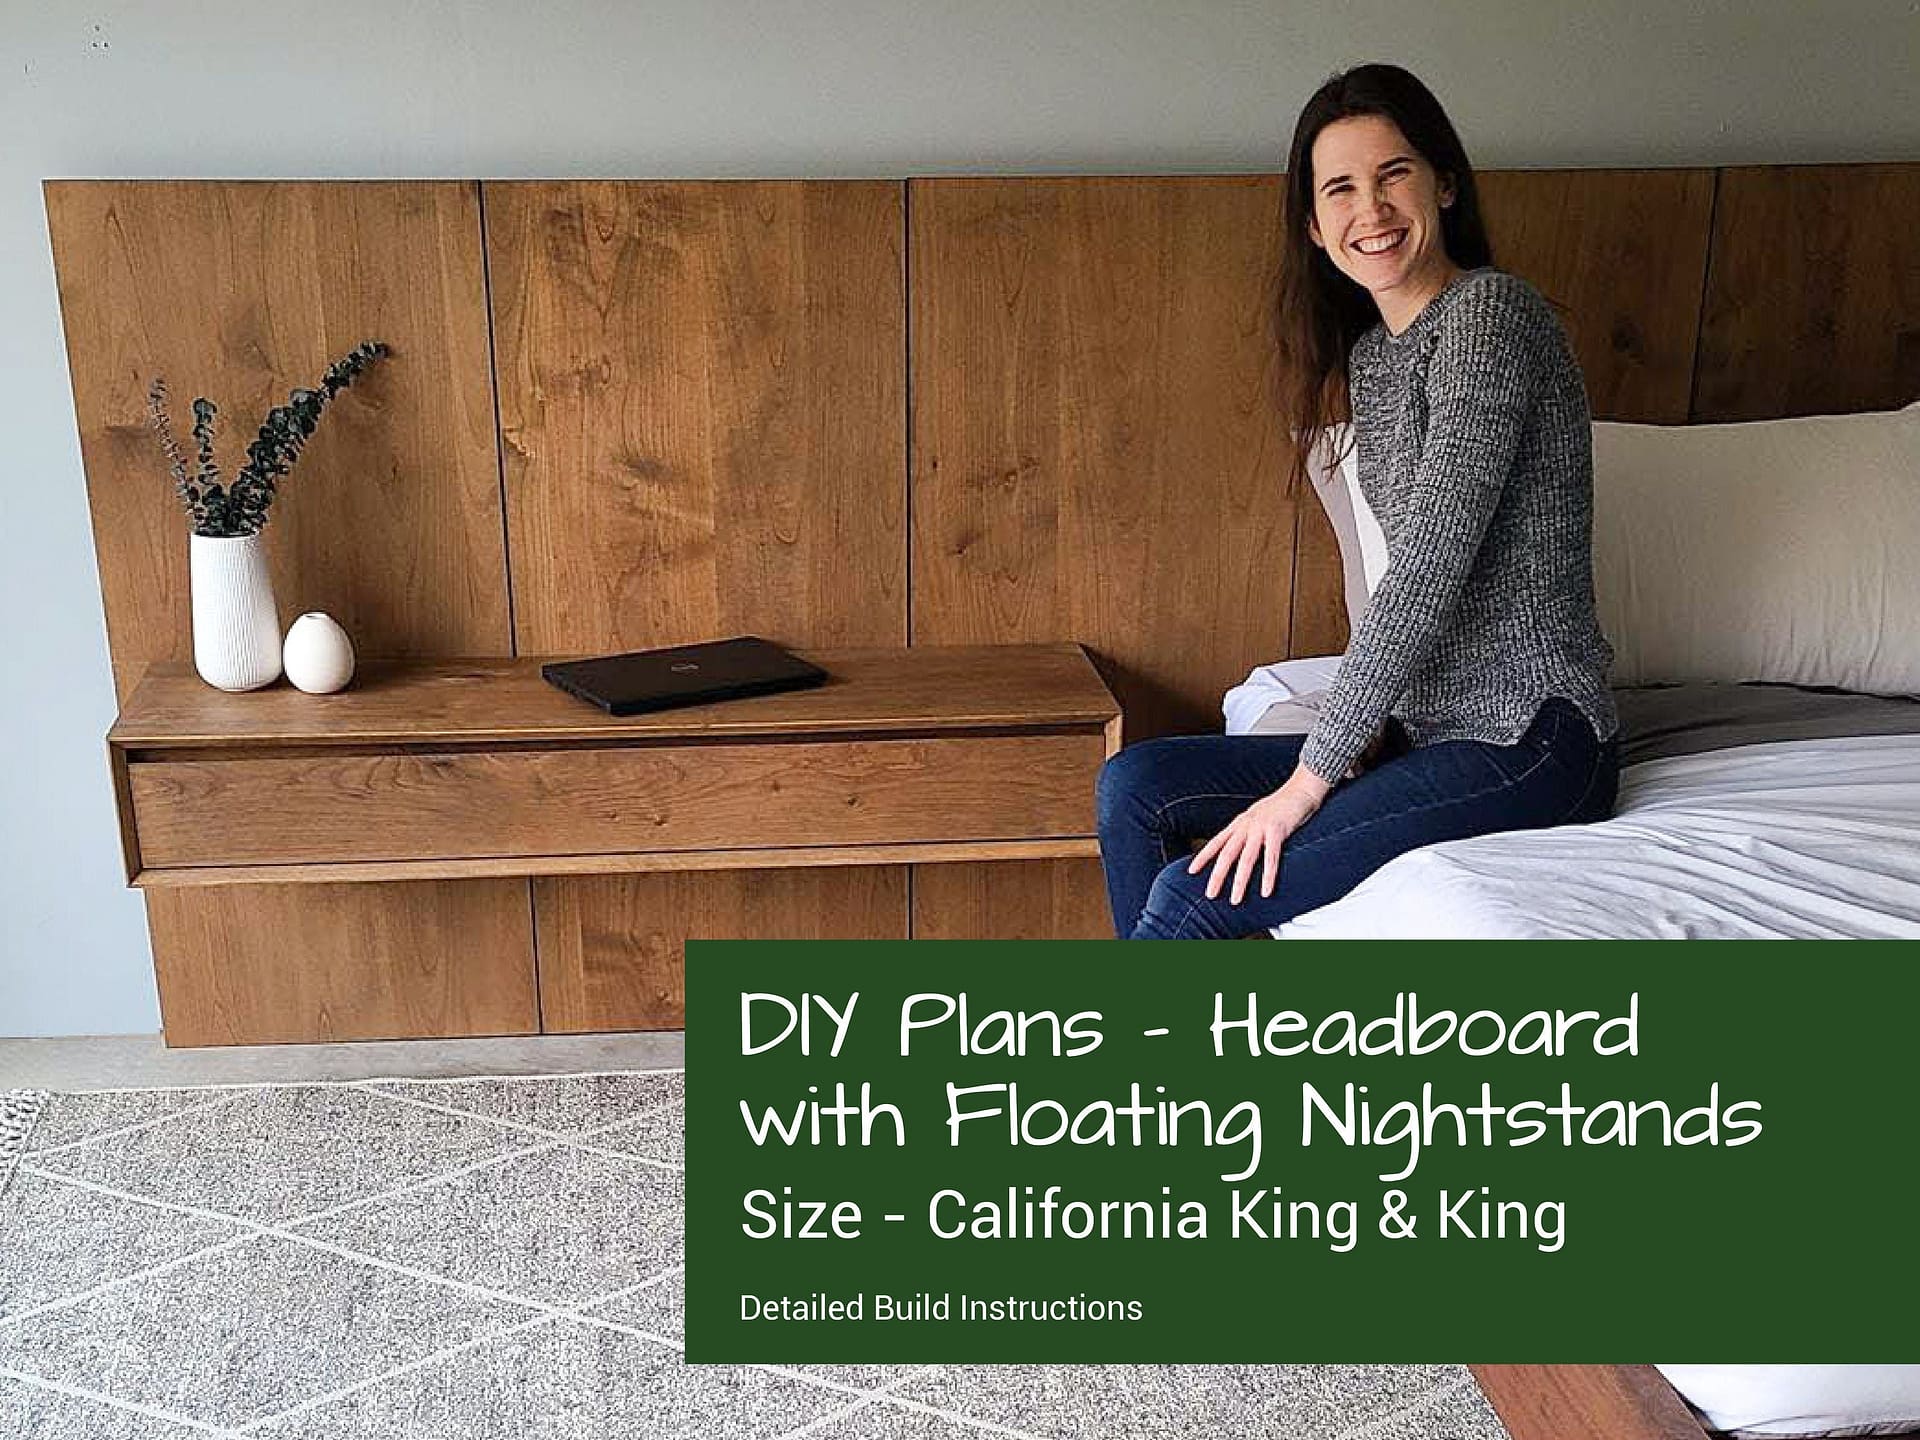 Different Materials Used in Floating Nightstand Construction